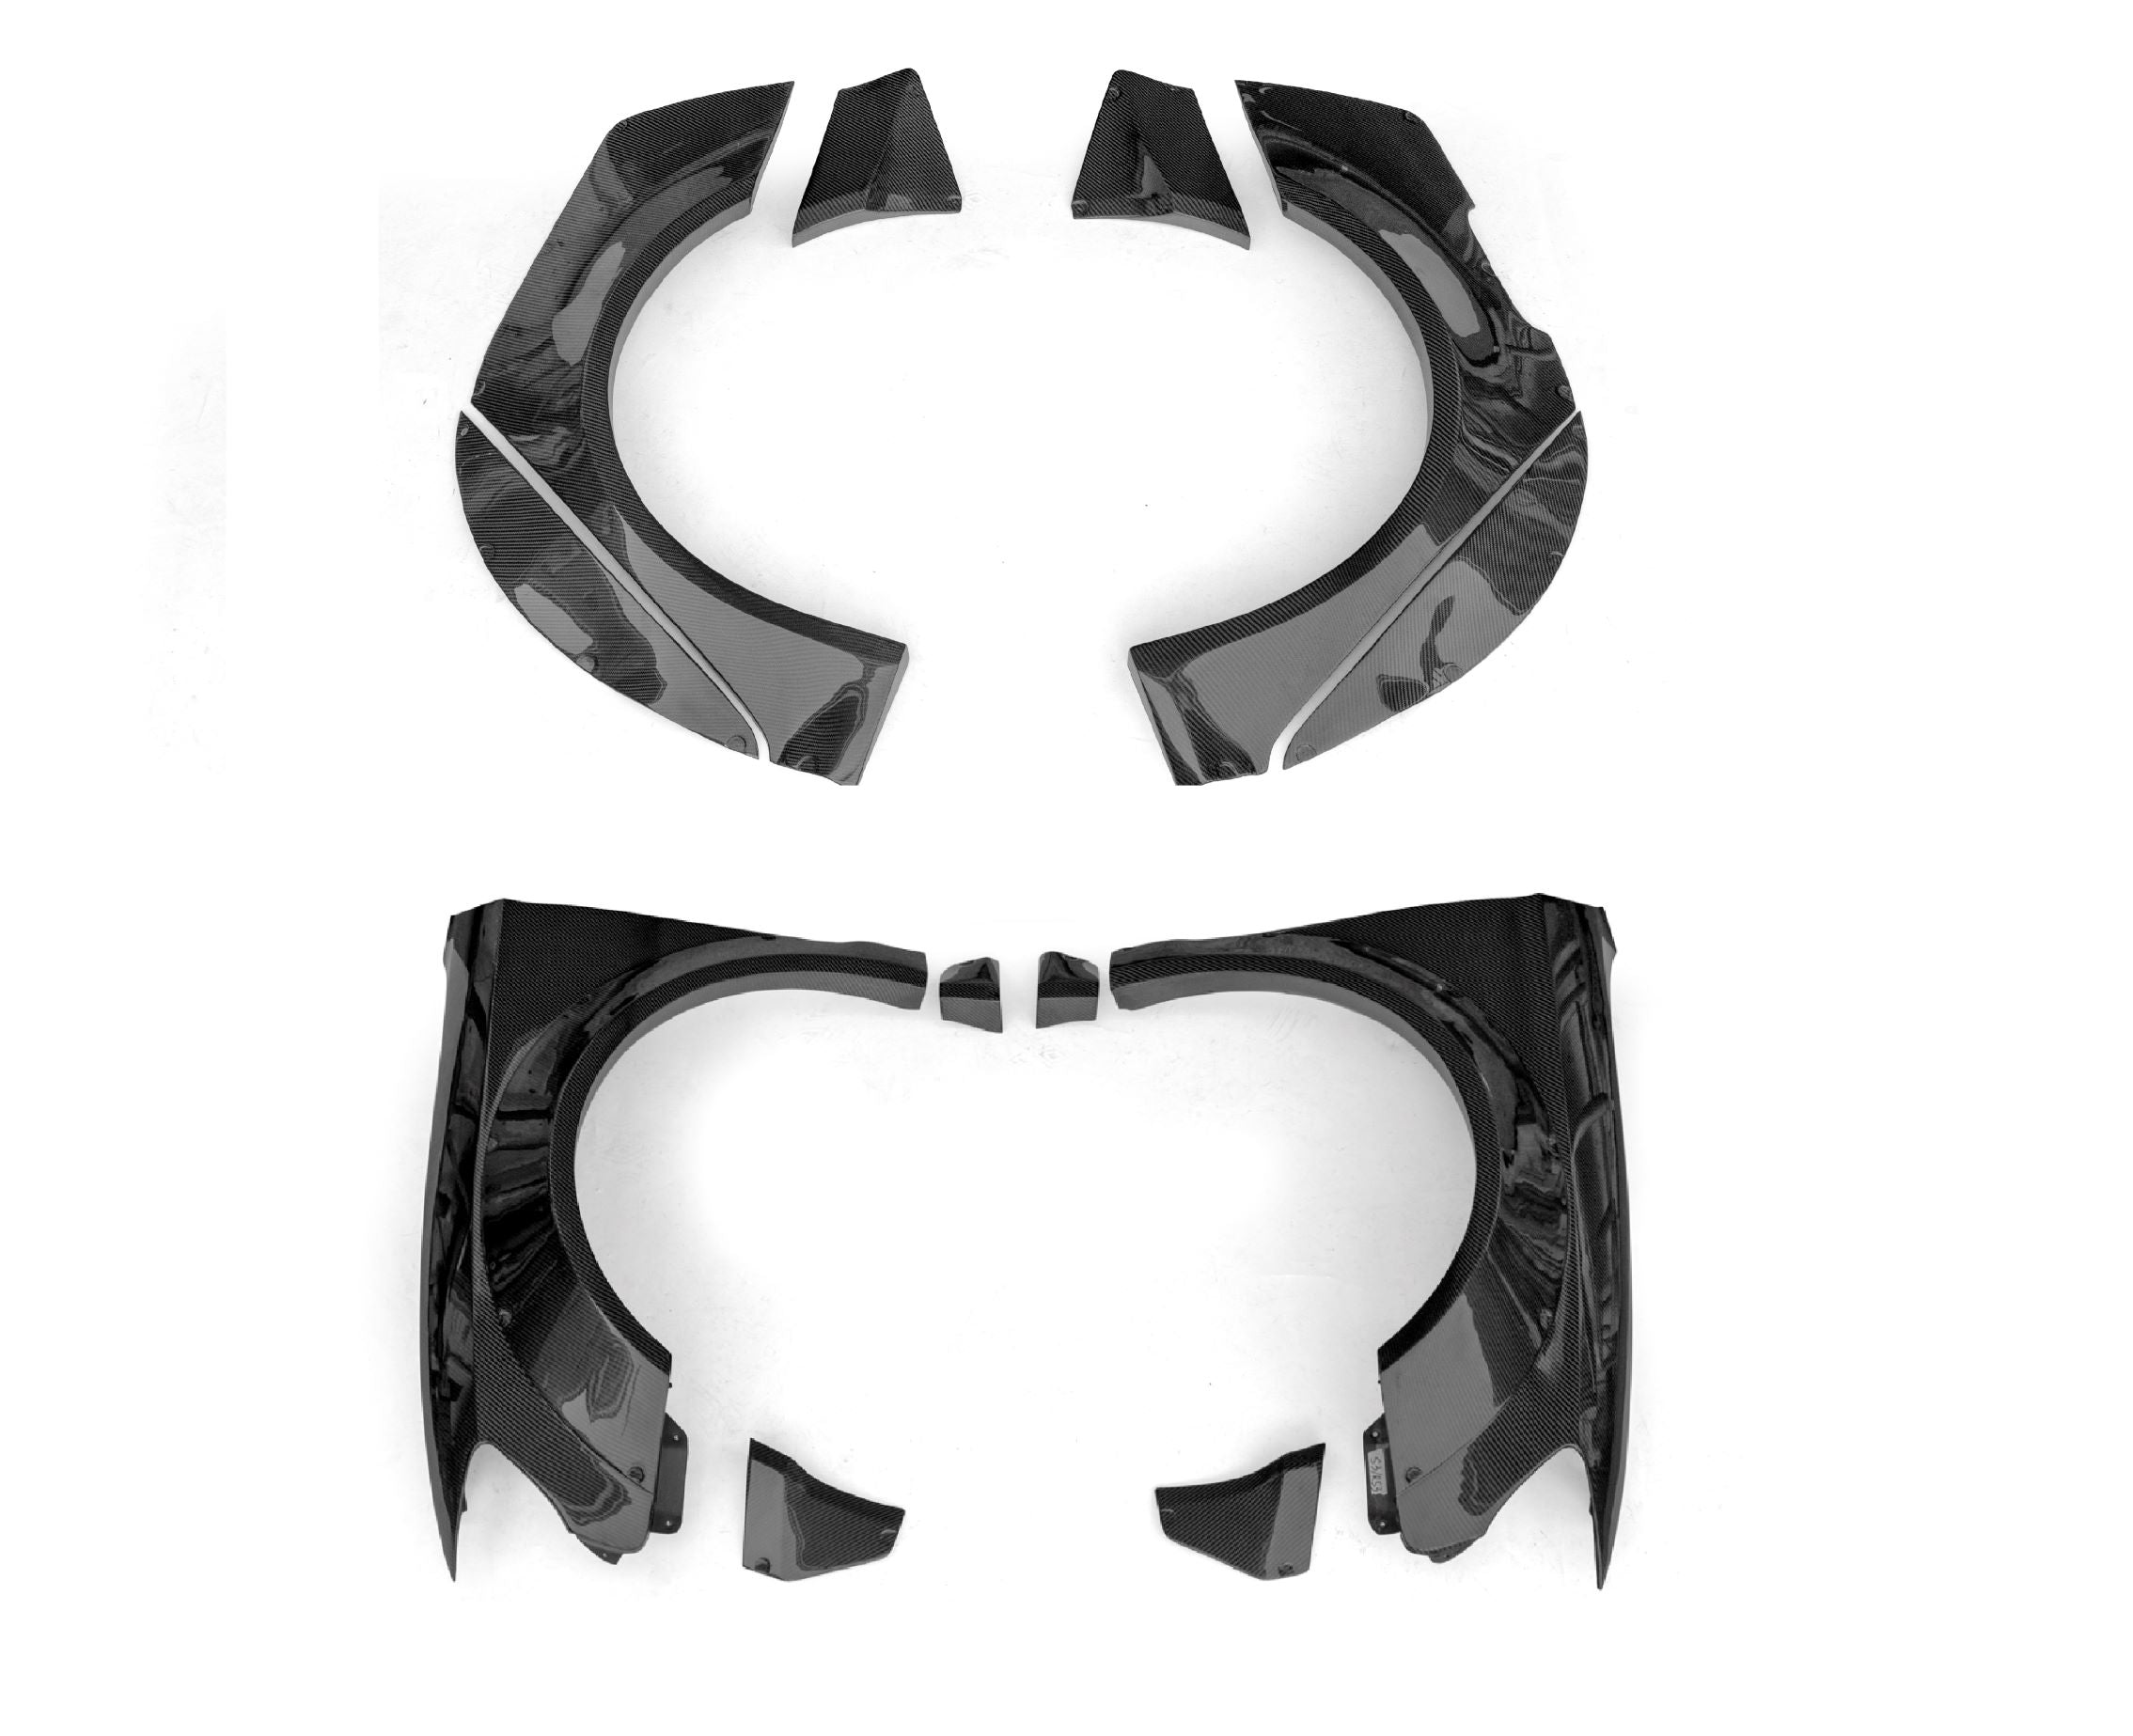 New Release!! CMST Carbon Fiber Widebody Fender Arches ( 12 Pcs ) for Audi RS3 2014-ON